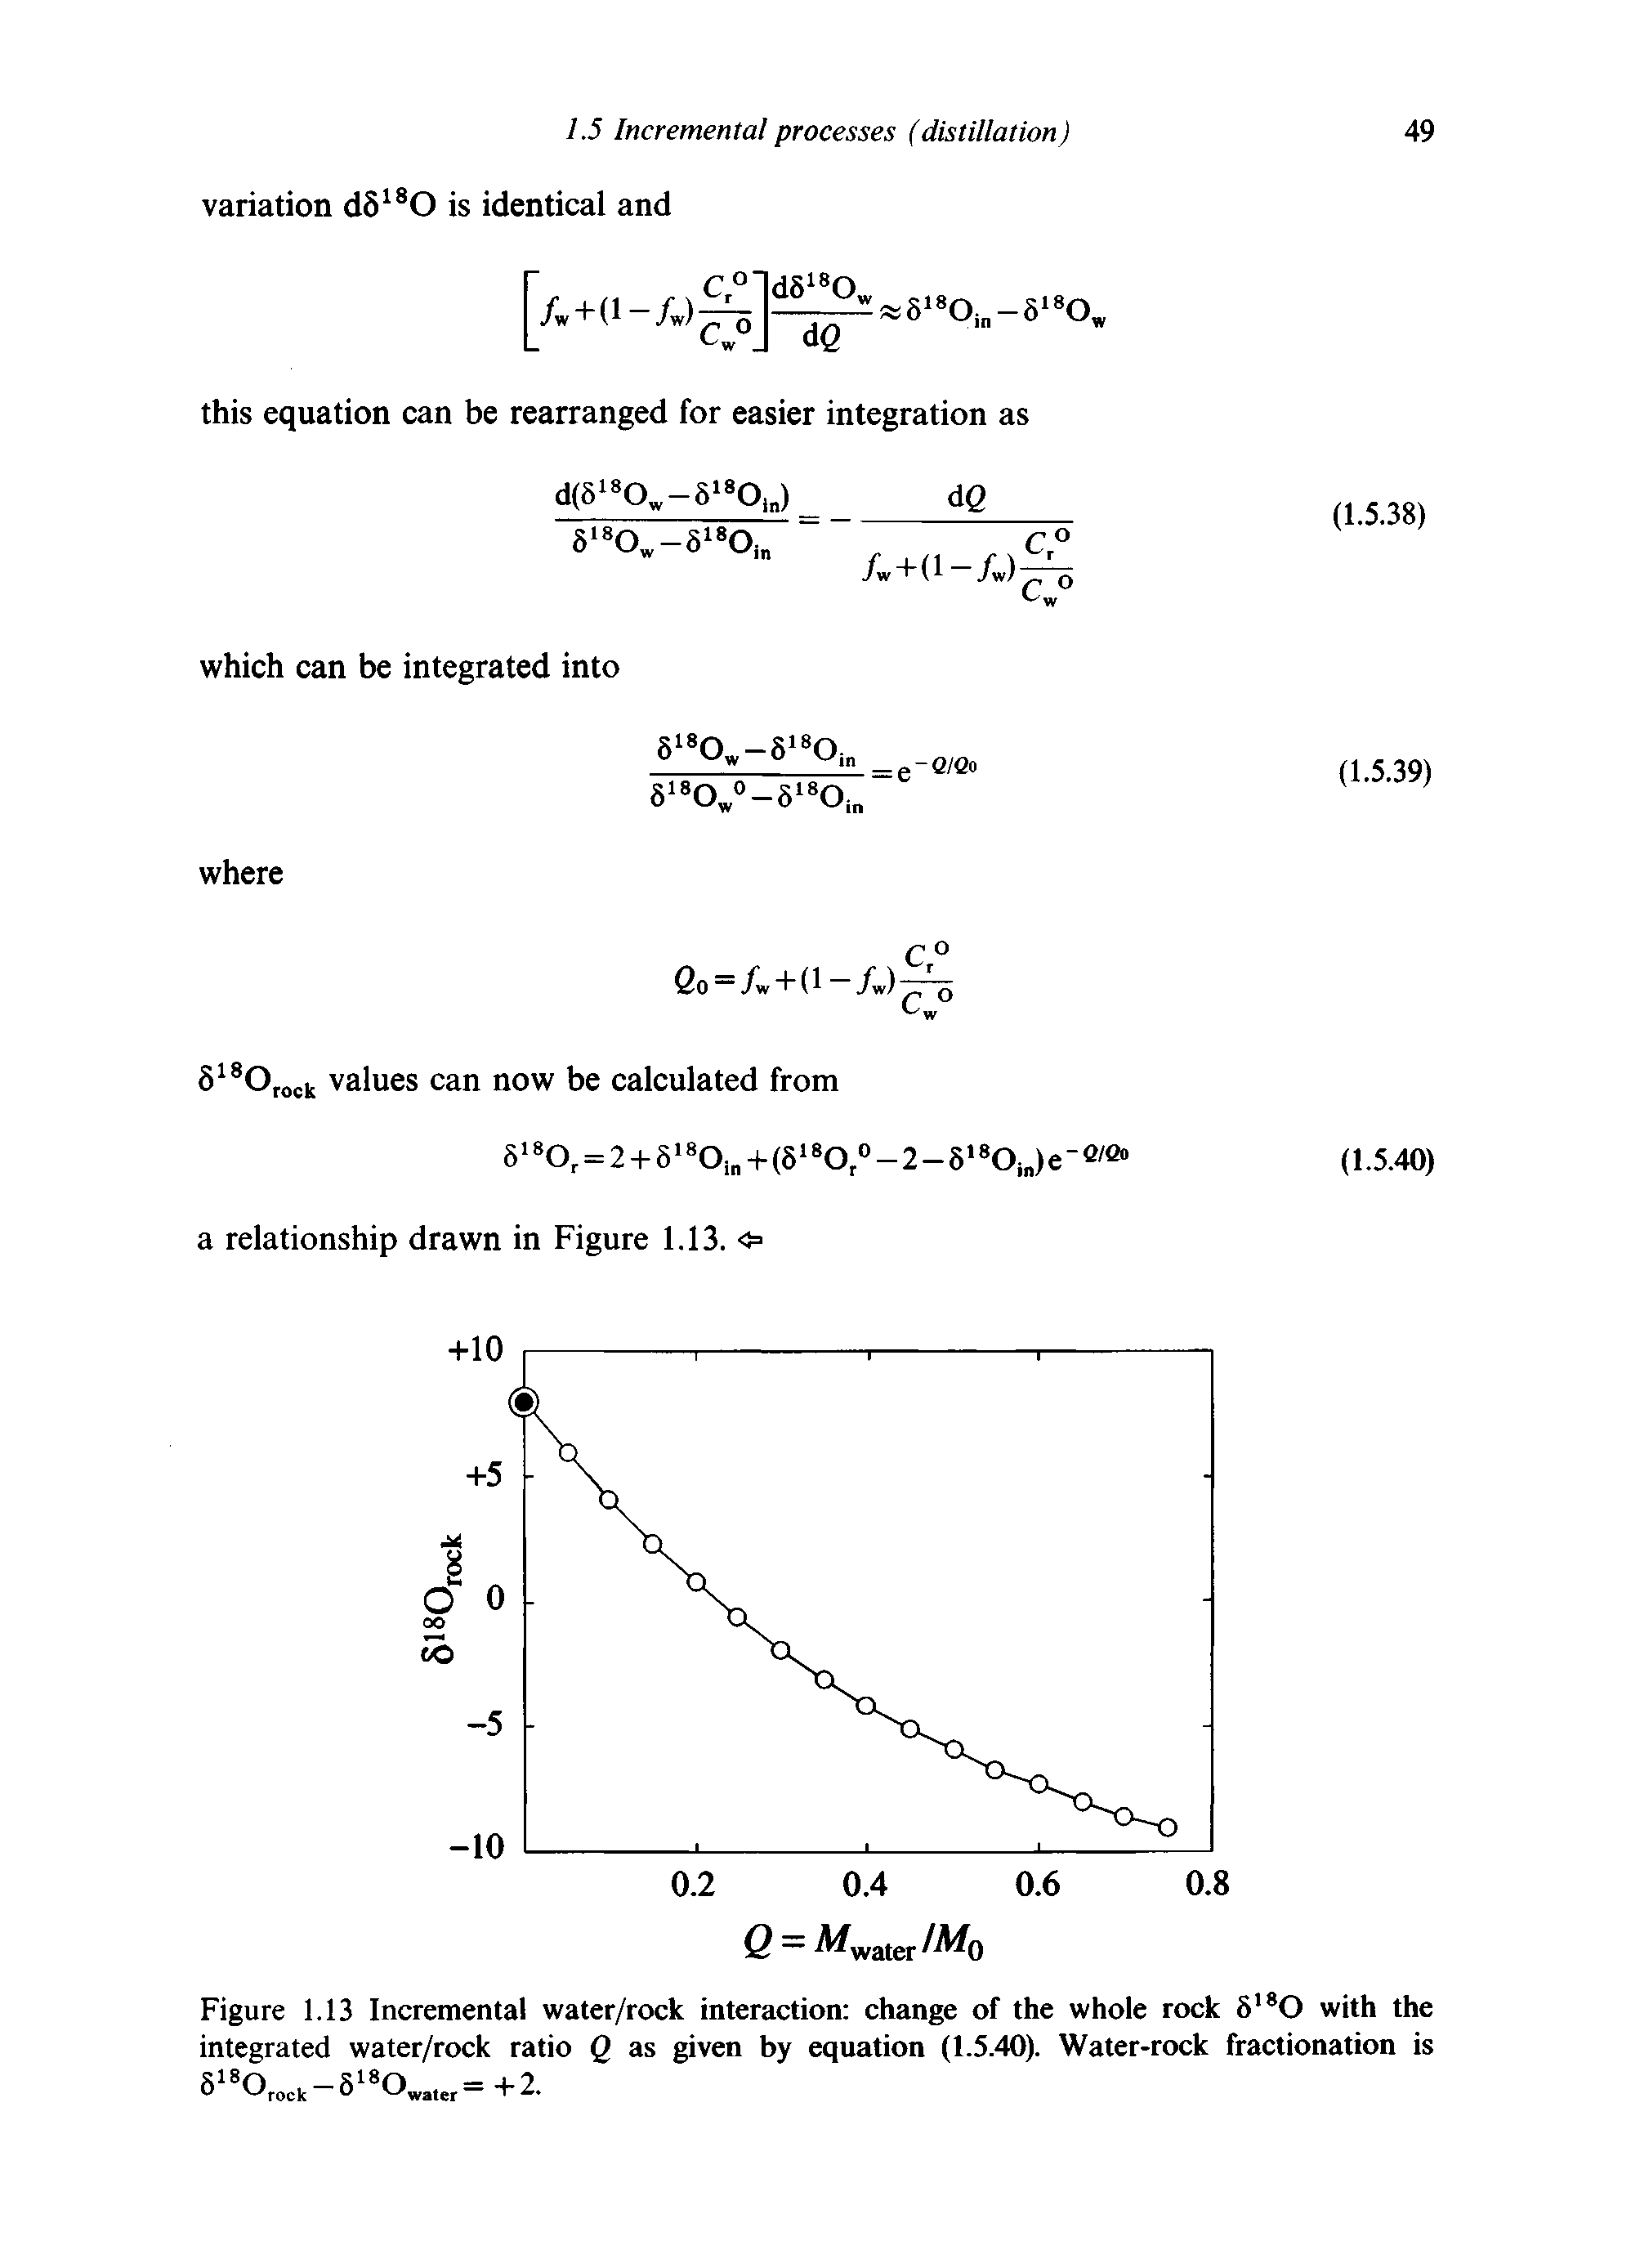 Figure 1.13 Incremental water/rock interaction change of the whole rock 5180 with the integrated water/rock ratio Q as given by equation (1.5.40). Water-rock fractionation is...